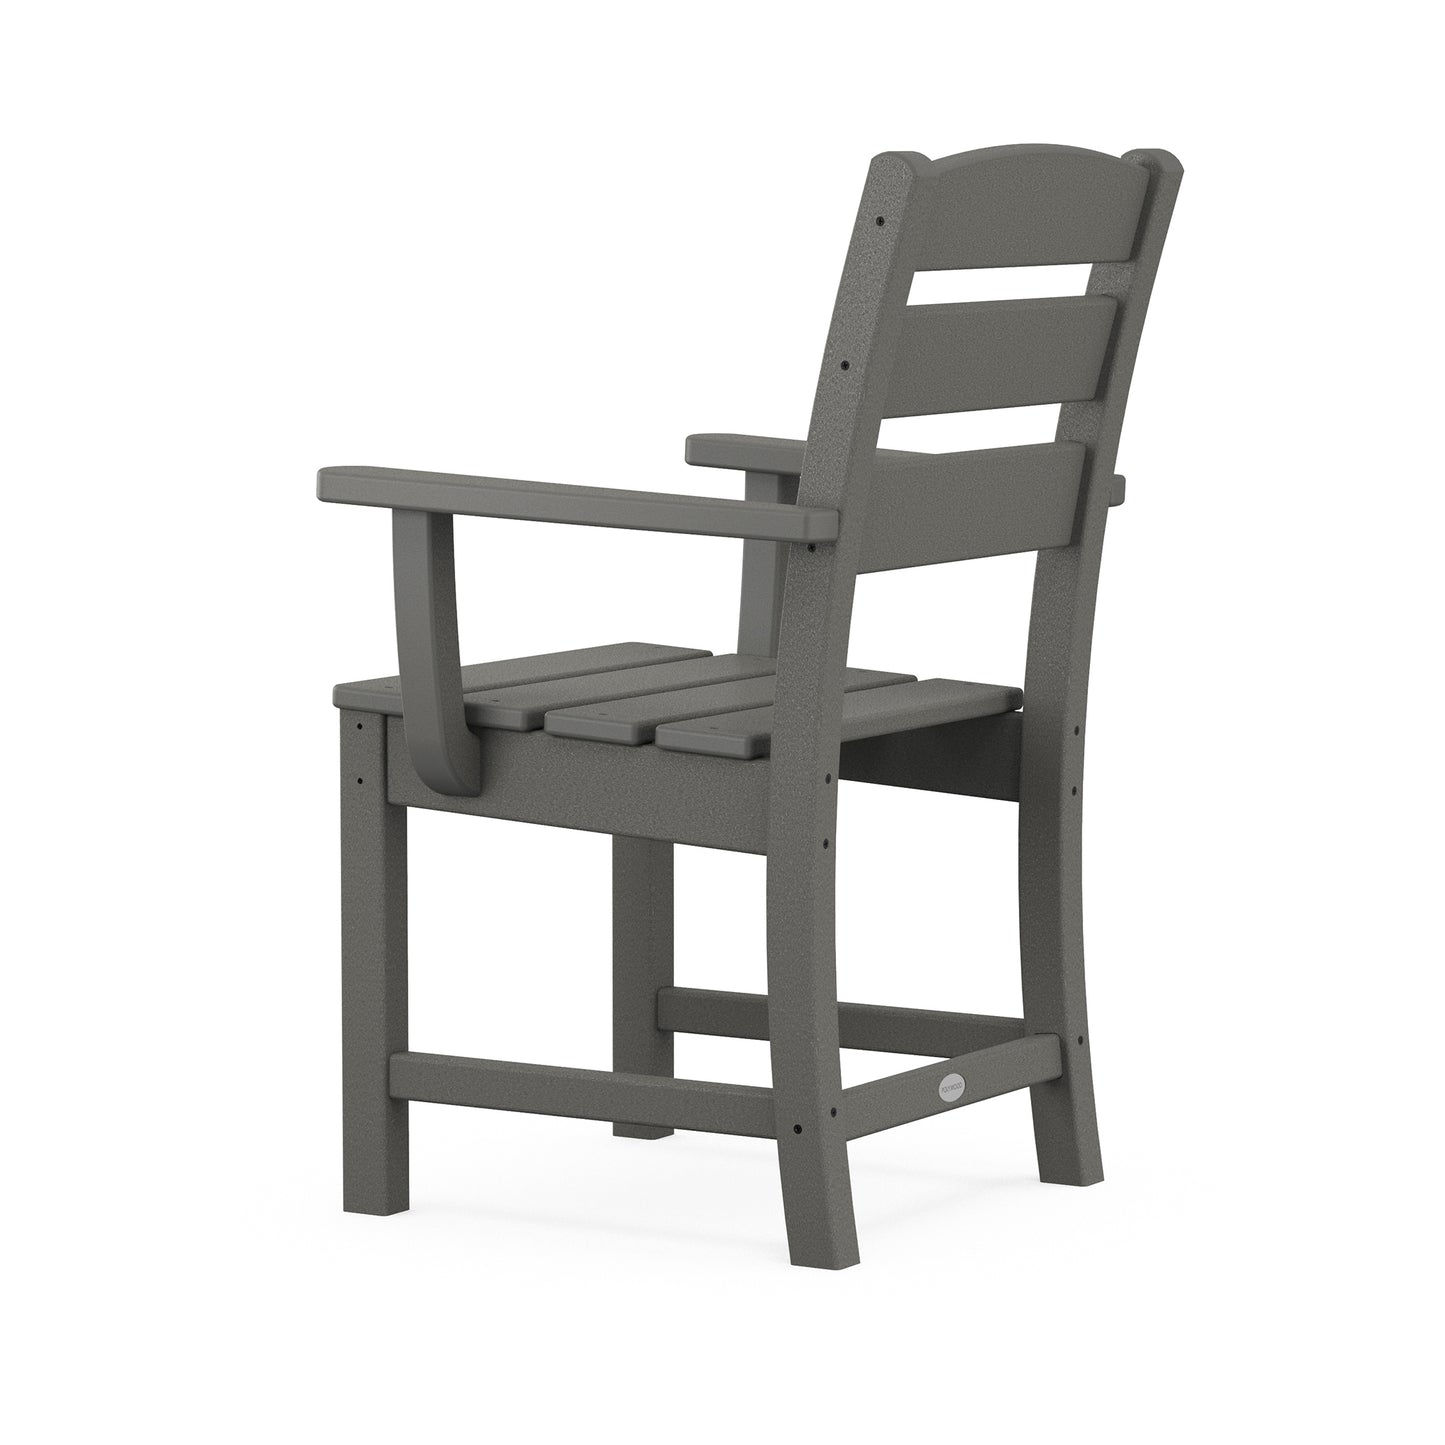 A single gray POLYWOOD® Lakeside Dining Arm Chair with a high back and broad armrests, set against a white background.